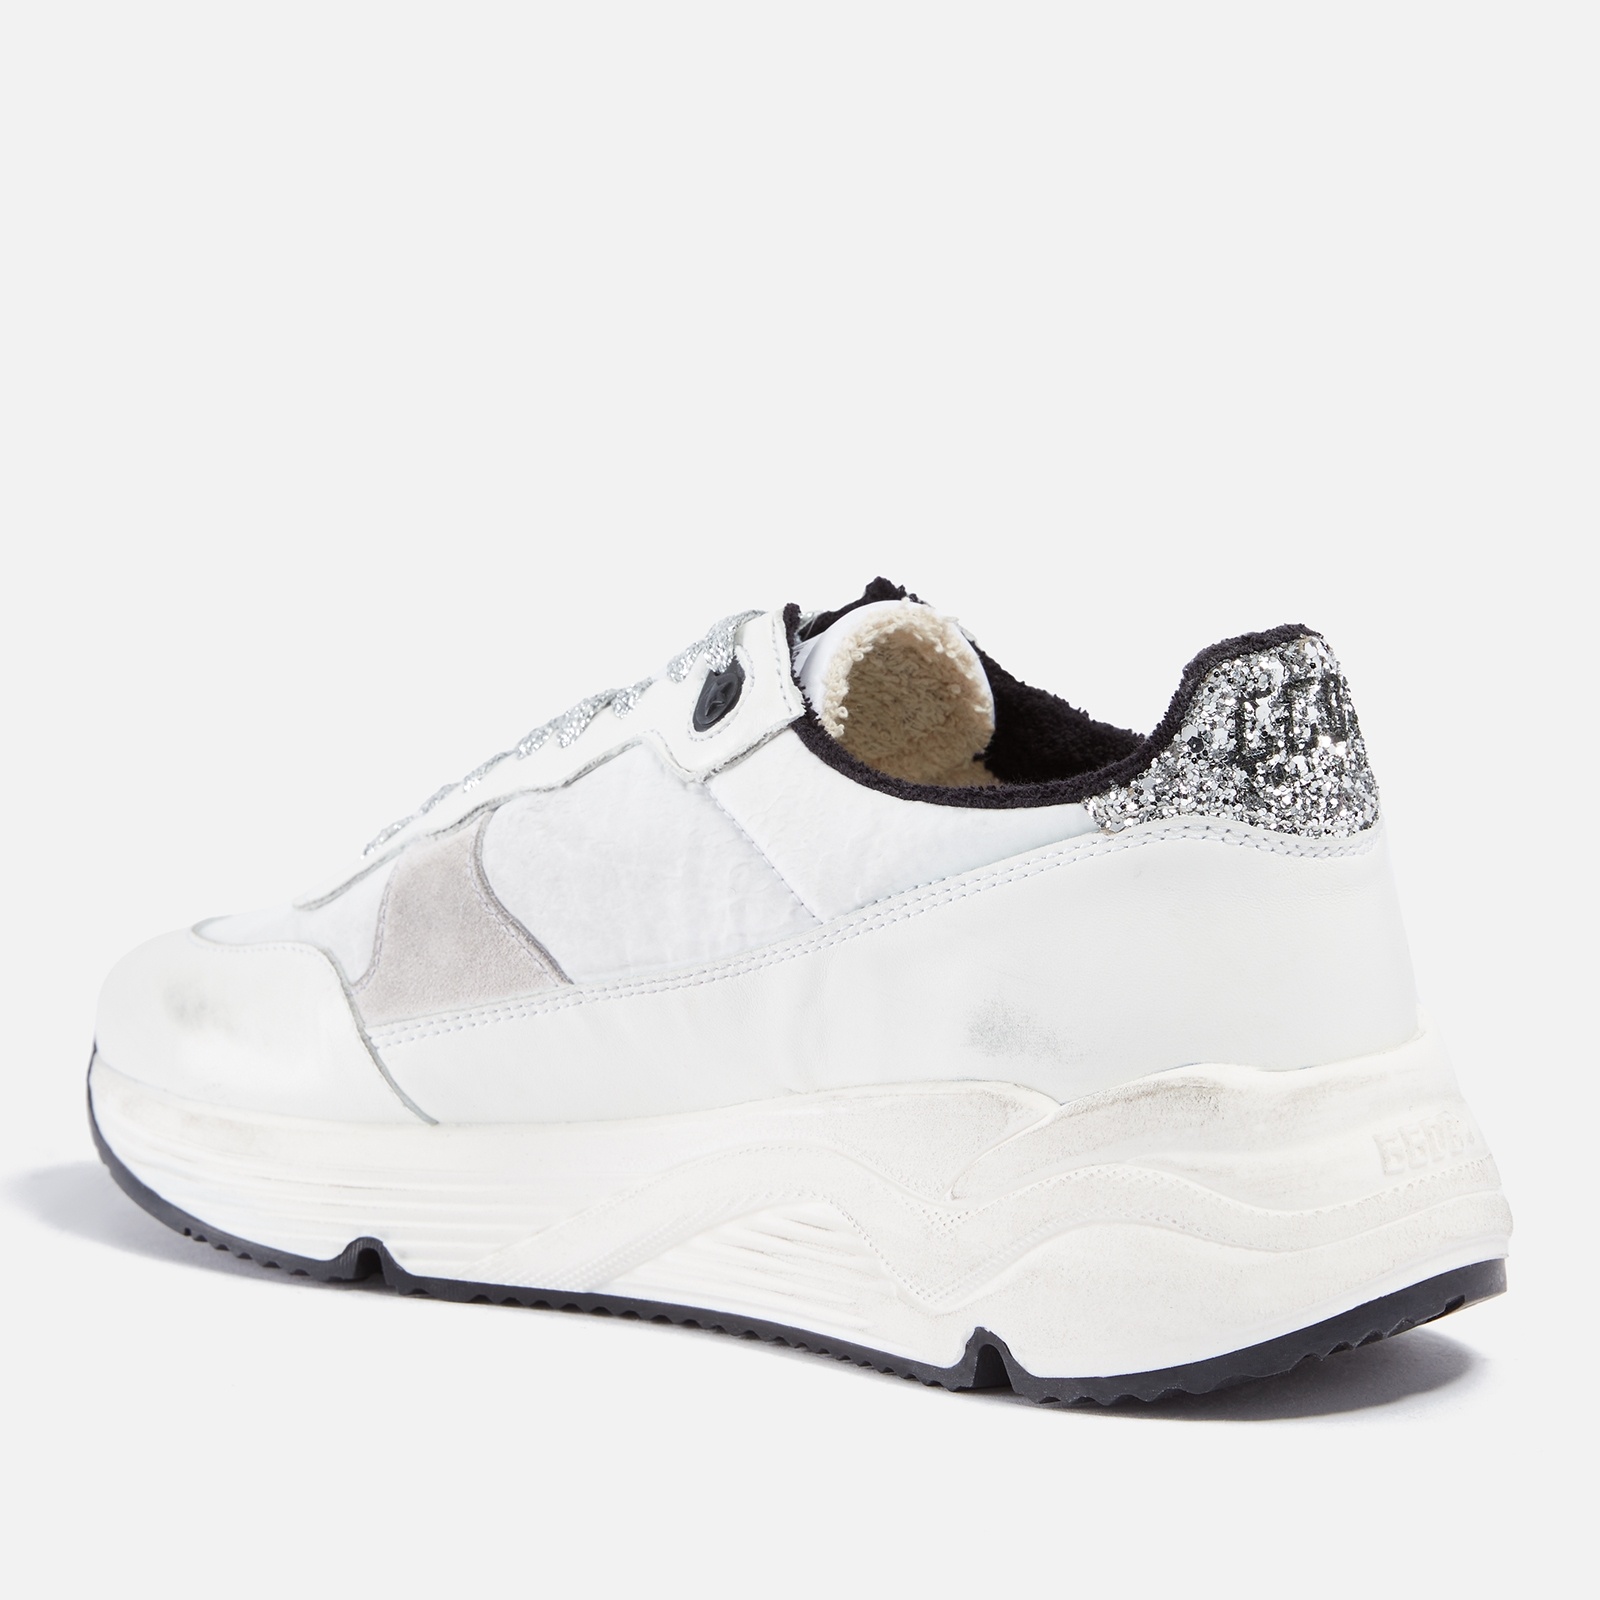 Golden Goose Women's Running Sole Trainers - Optic White/Black/Silver - 2